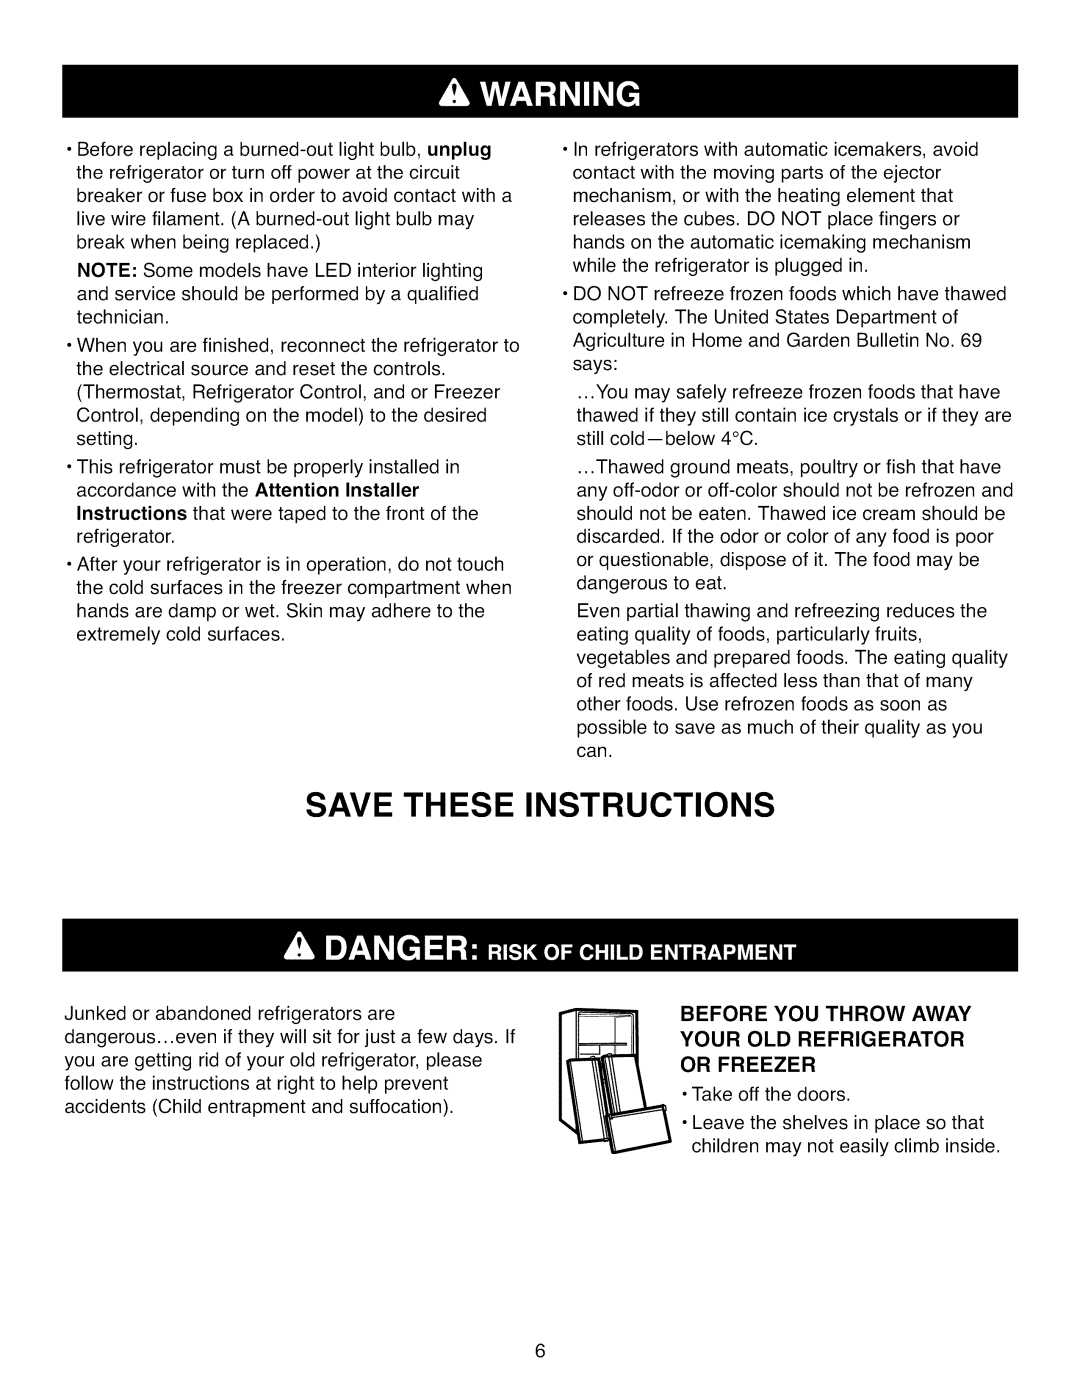 Kenmore 795.7104 Save These Instructions, Before You Throw Away, Your Old Refrigerator Or Freezer, • Take off the doors 